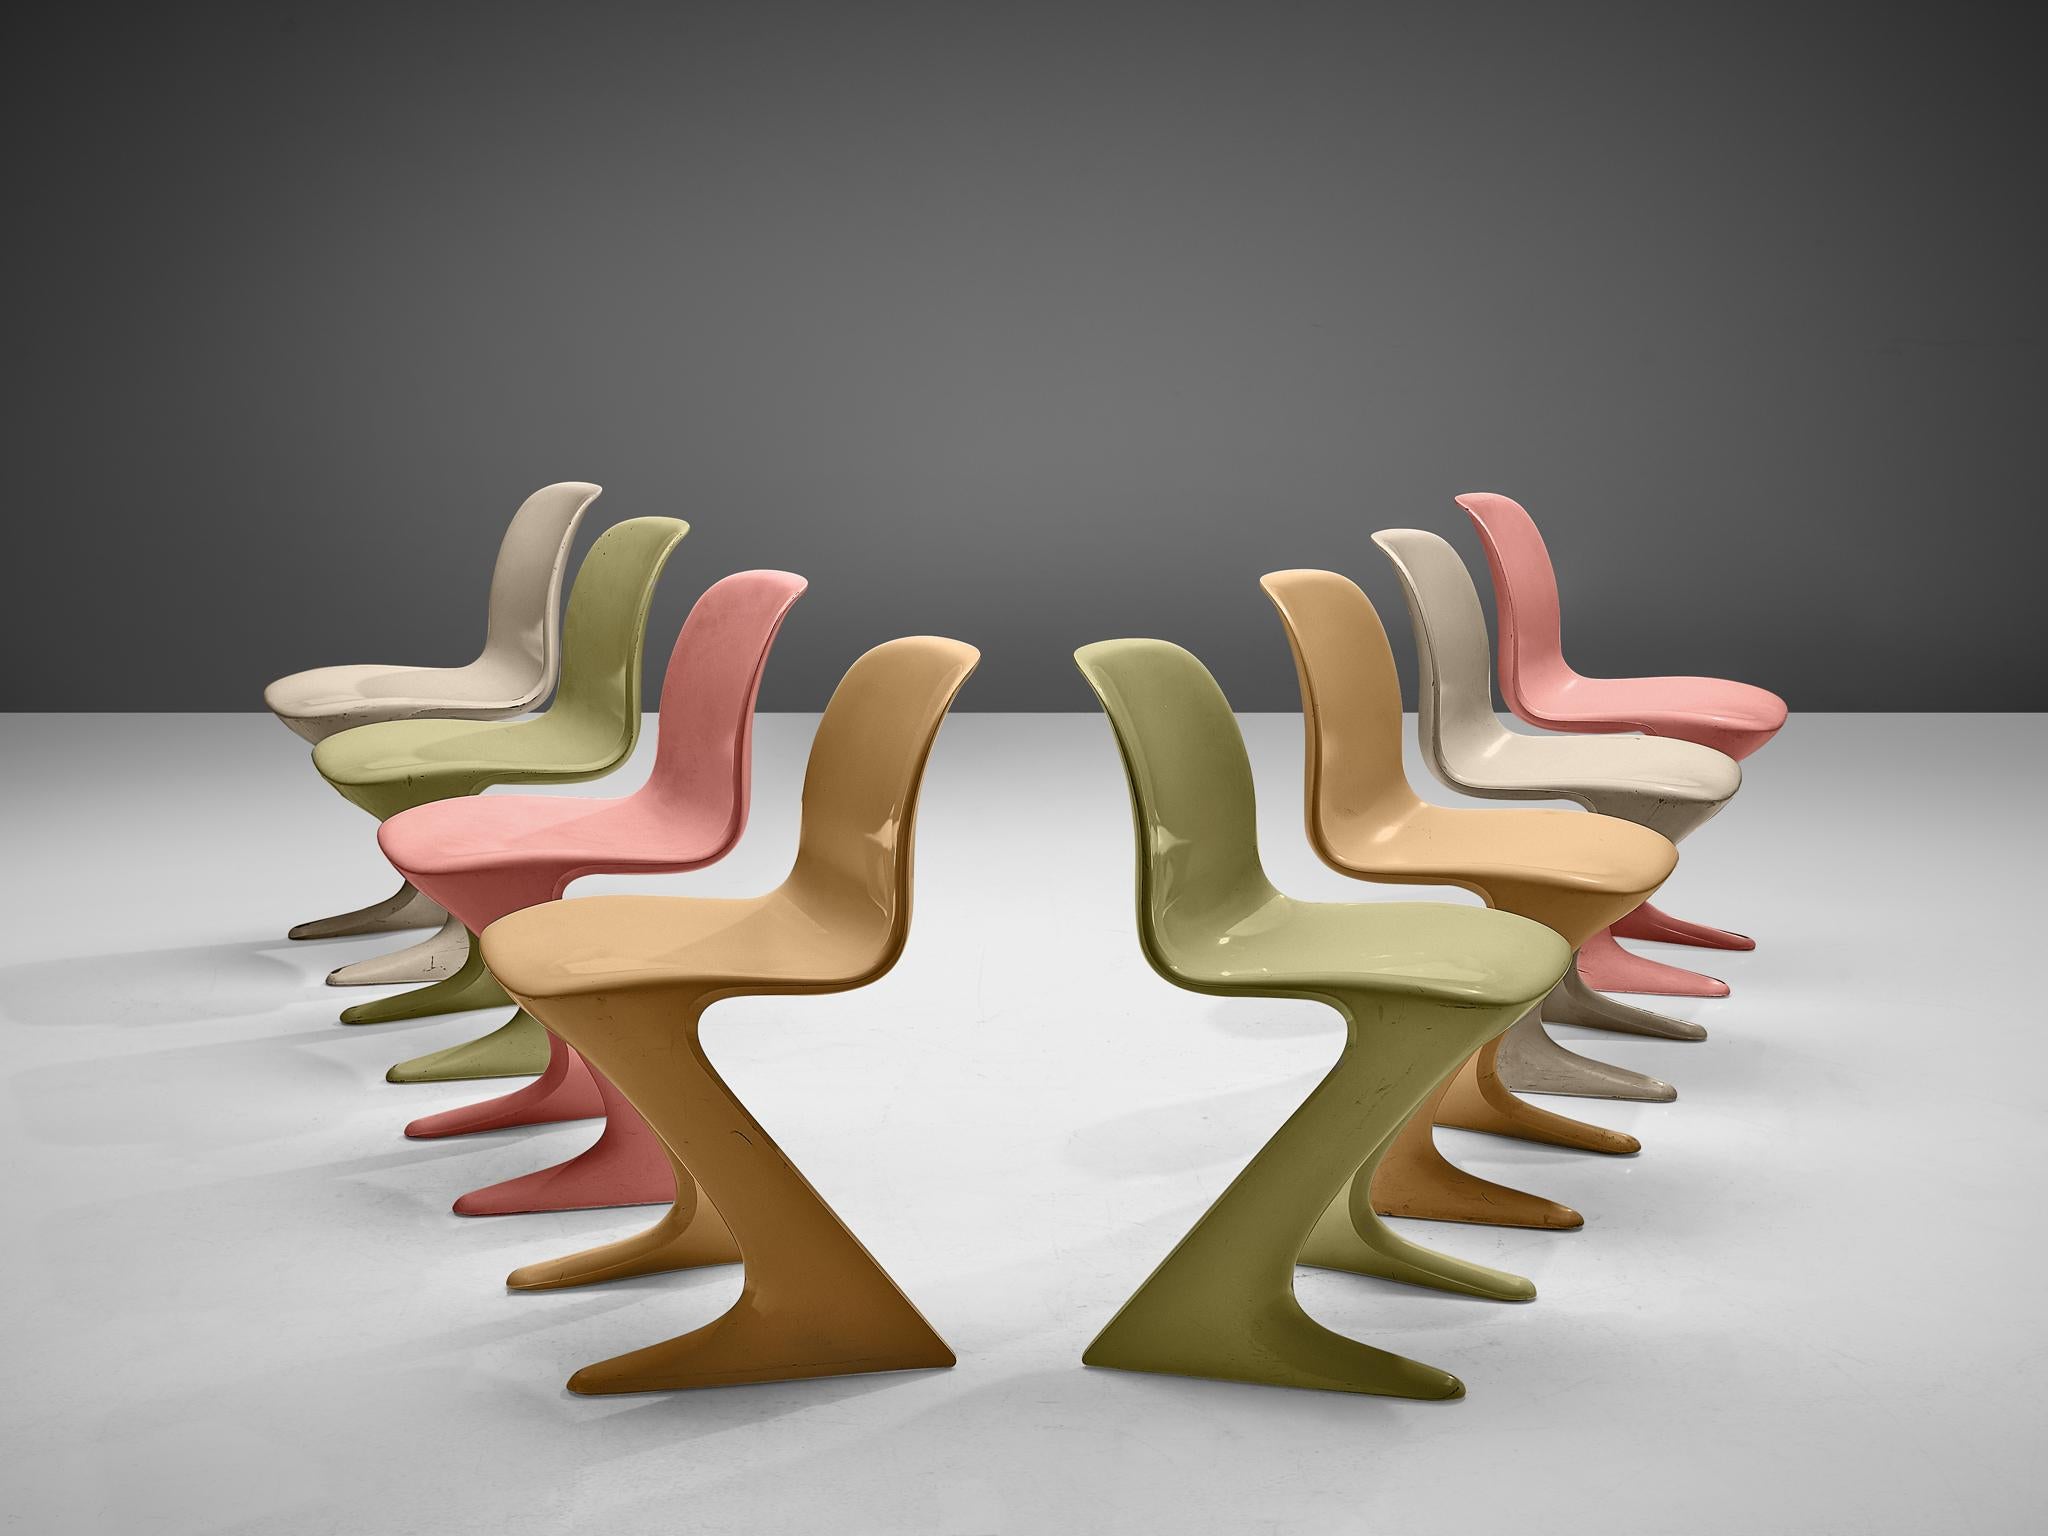 Ernst Moeckl for Trabant, 'Z' armchairs, wood, Germany, 1968

This set of colourful Kangaroo chairs is designed by Ernst Moeckl in 1968. The chair is also called the Z-chair, referring to its shape. During the period of the Iron Curtain, the Panton